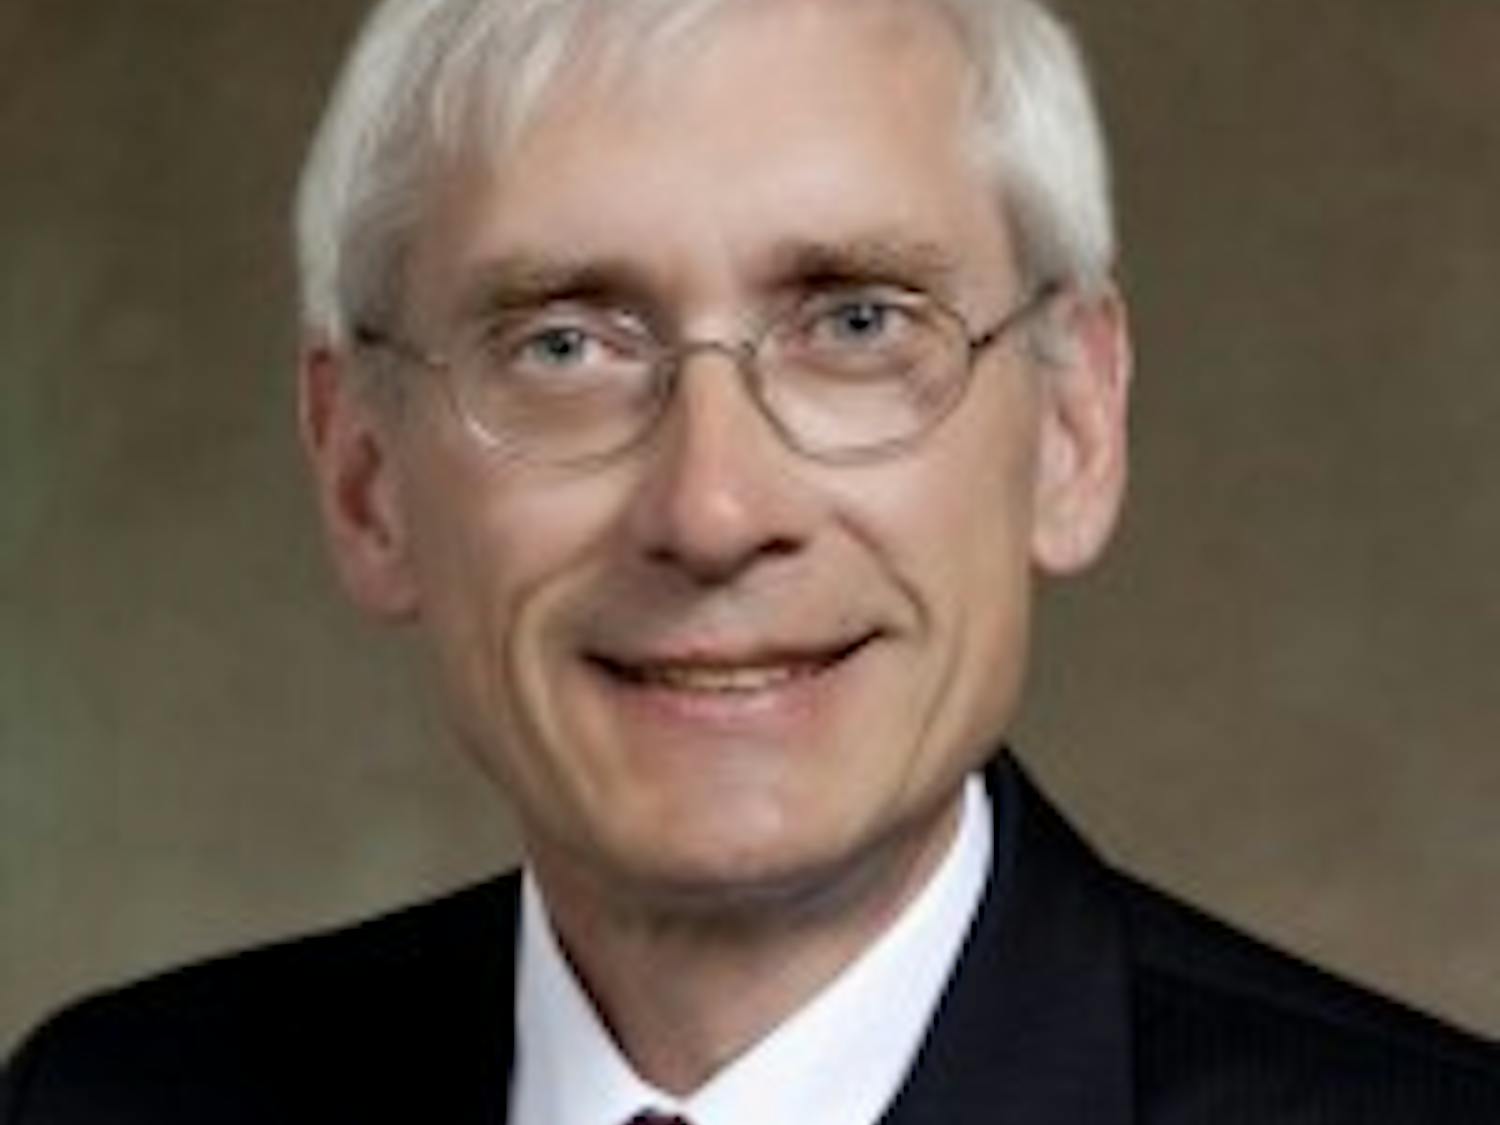 State Superintendent Tony Evers requested a $700 million increase in funding from the state in the next biennial budget.